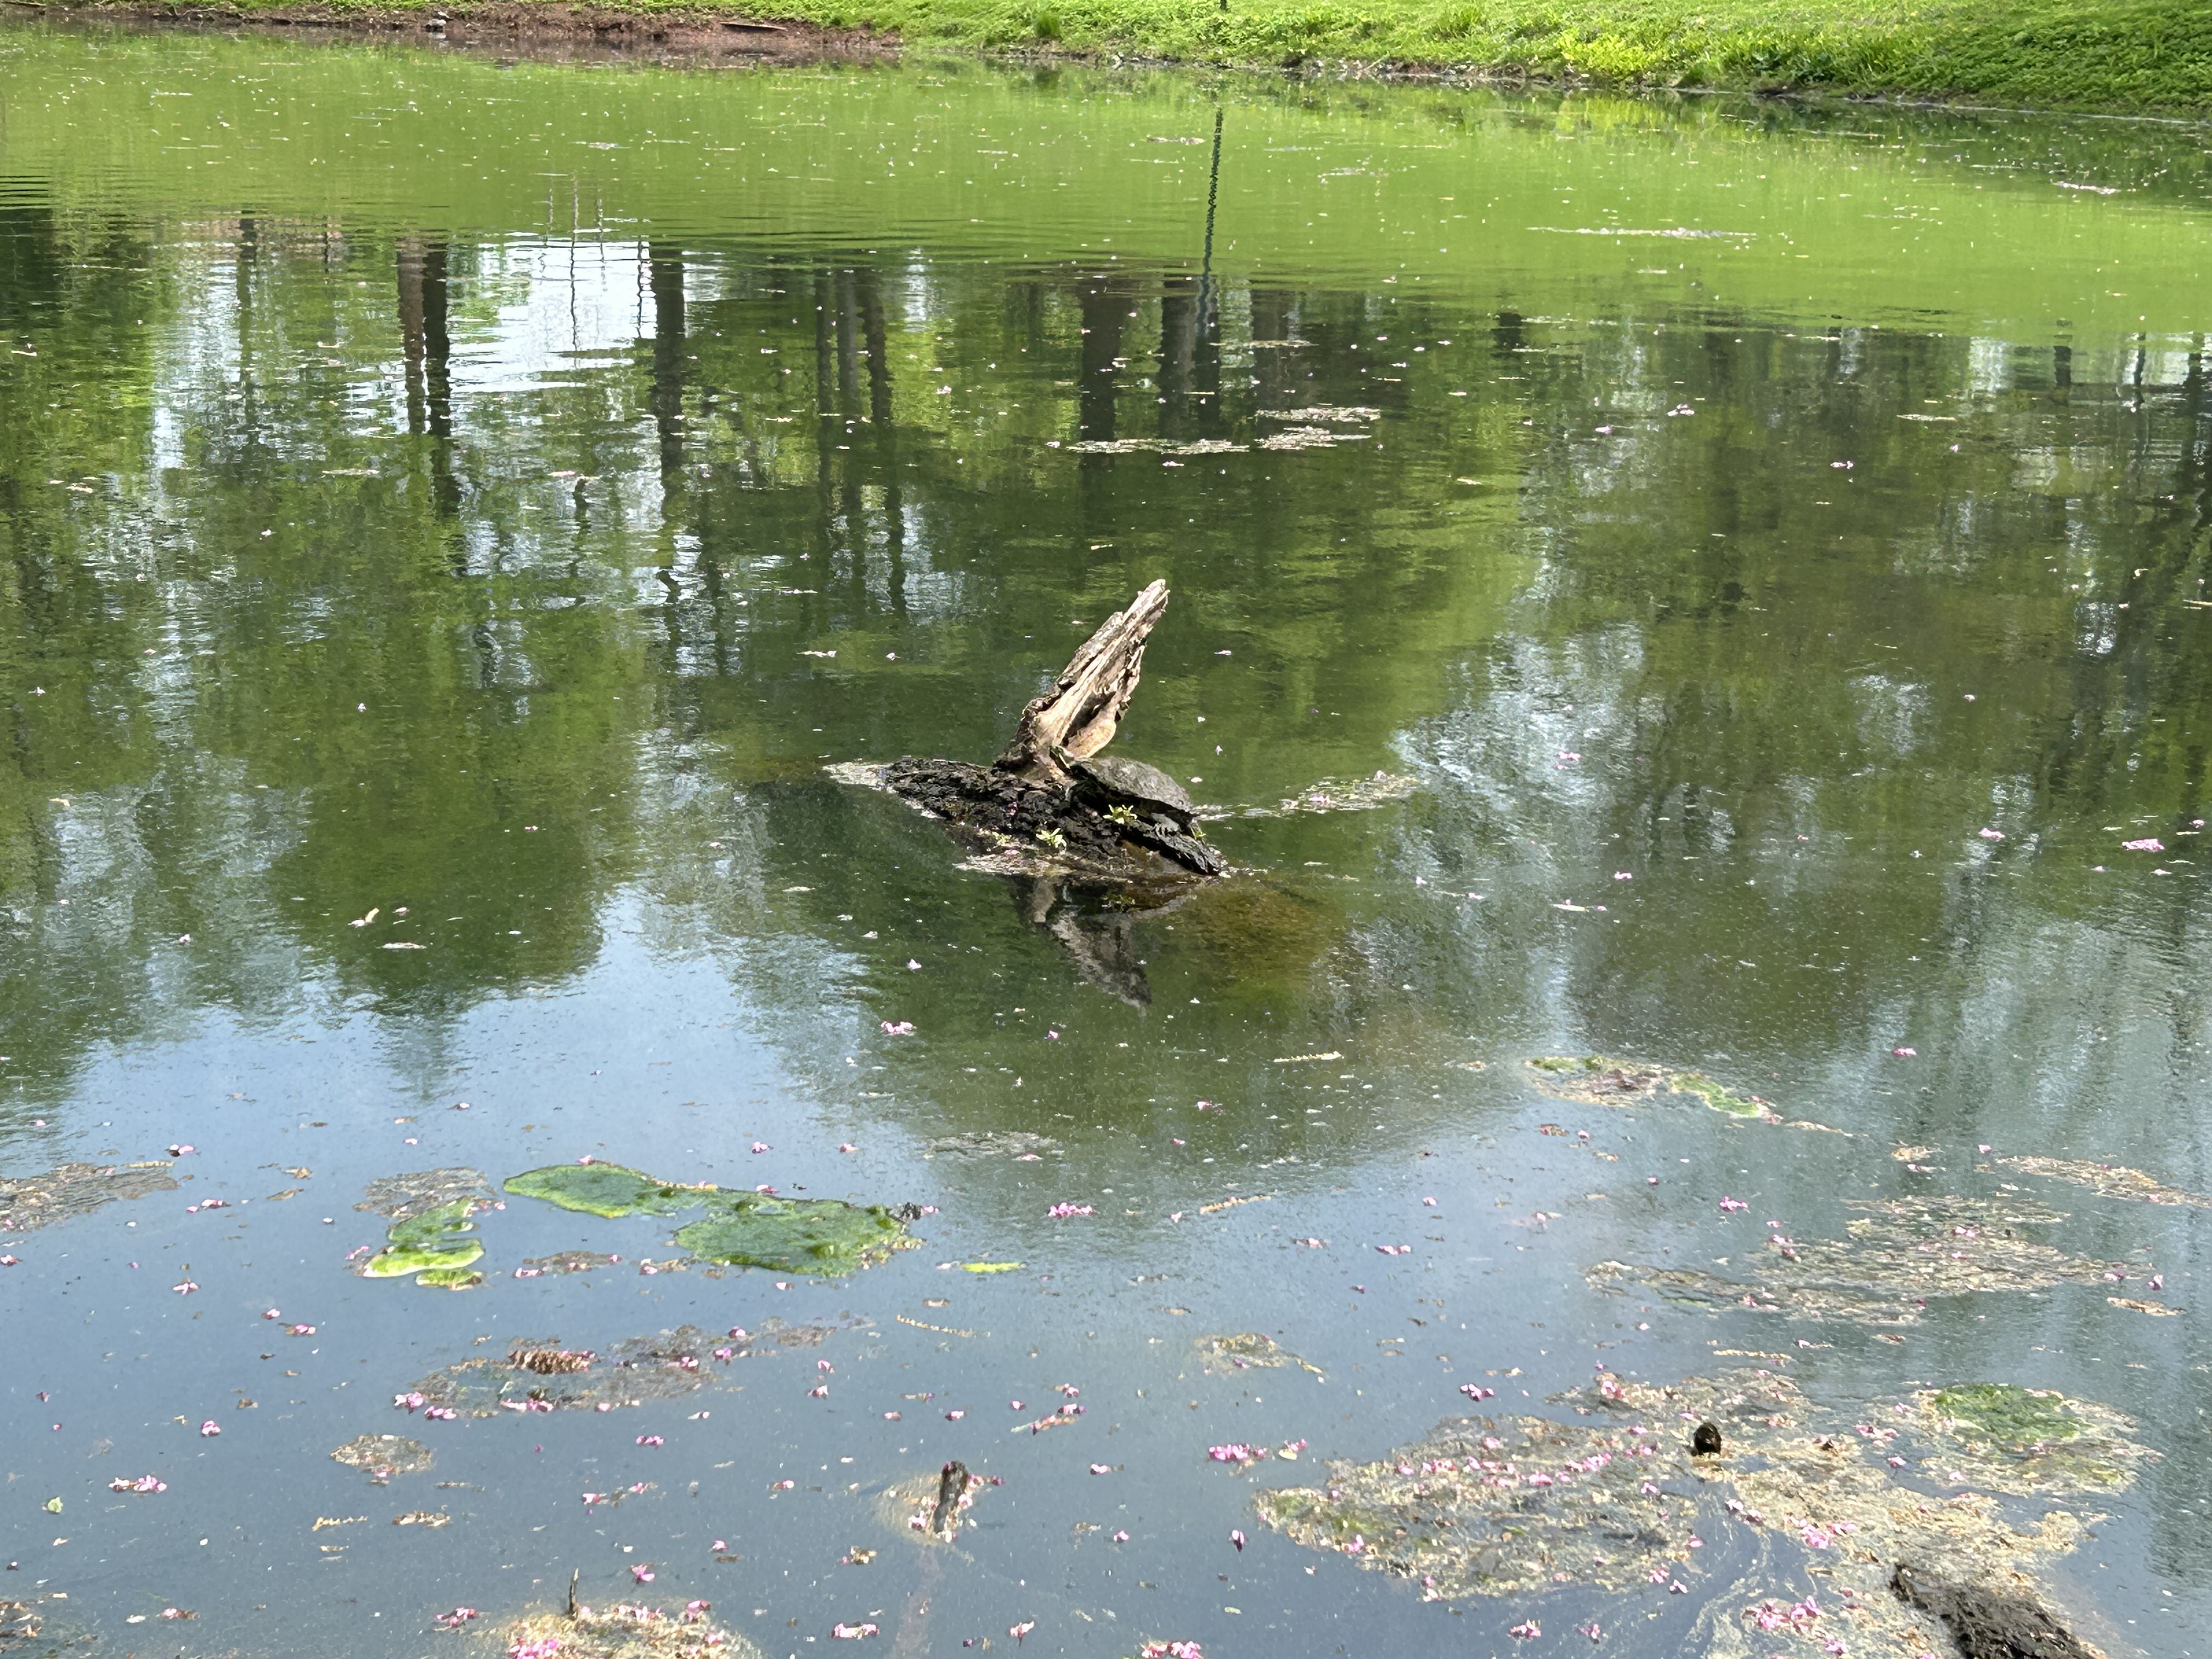 turtle on a log in the middle of a pond